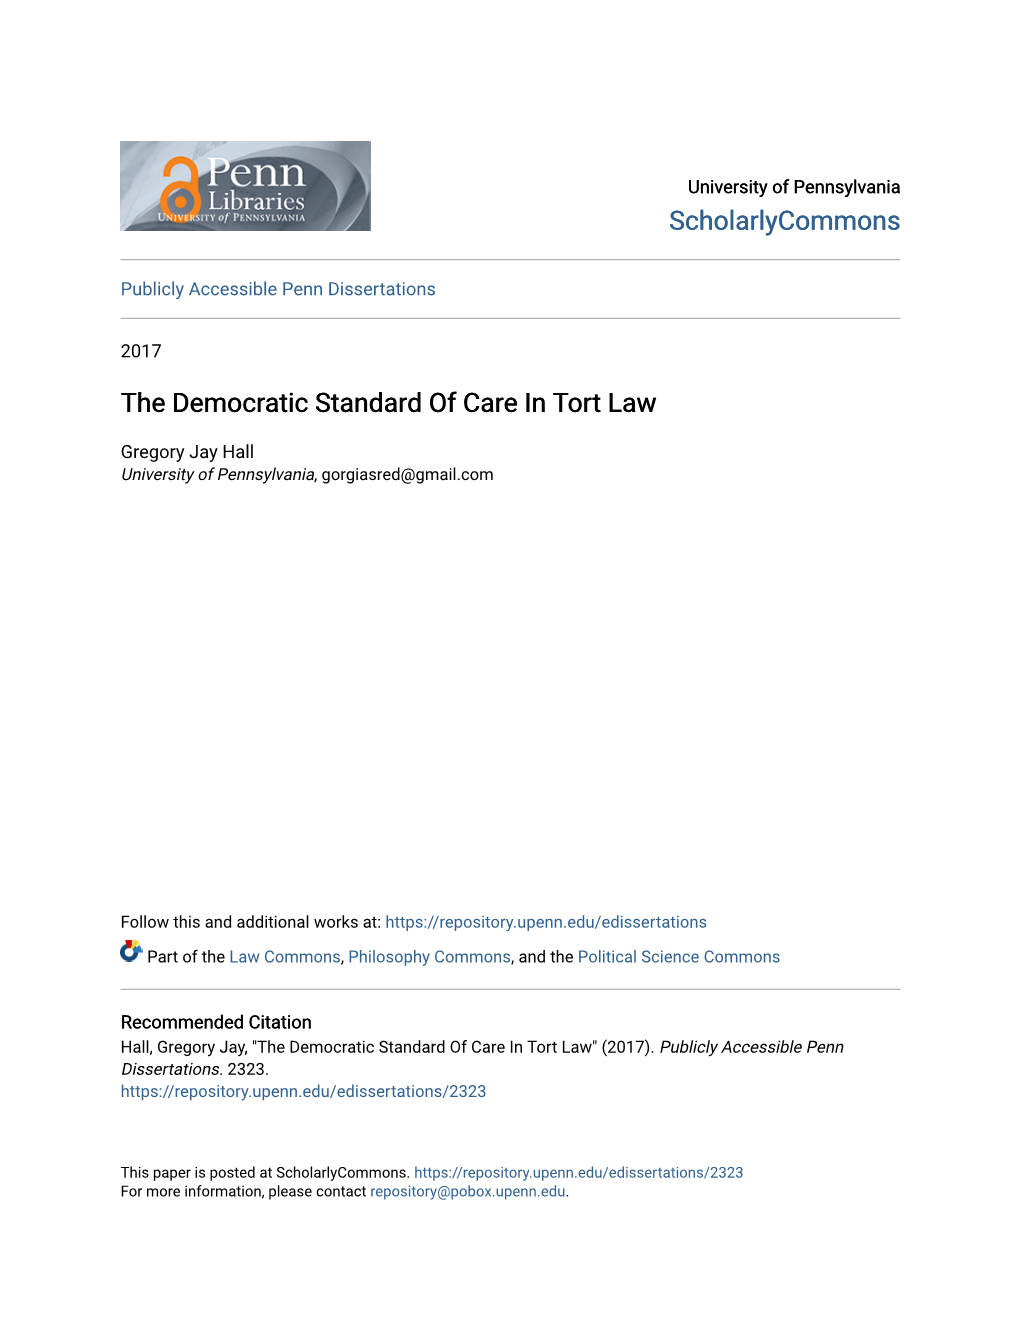 The Democratic Standard of Care in Tort Law